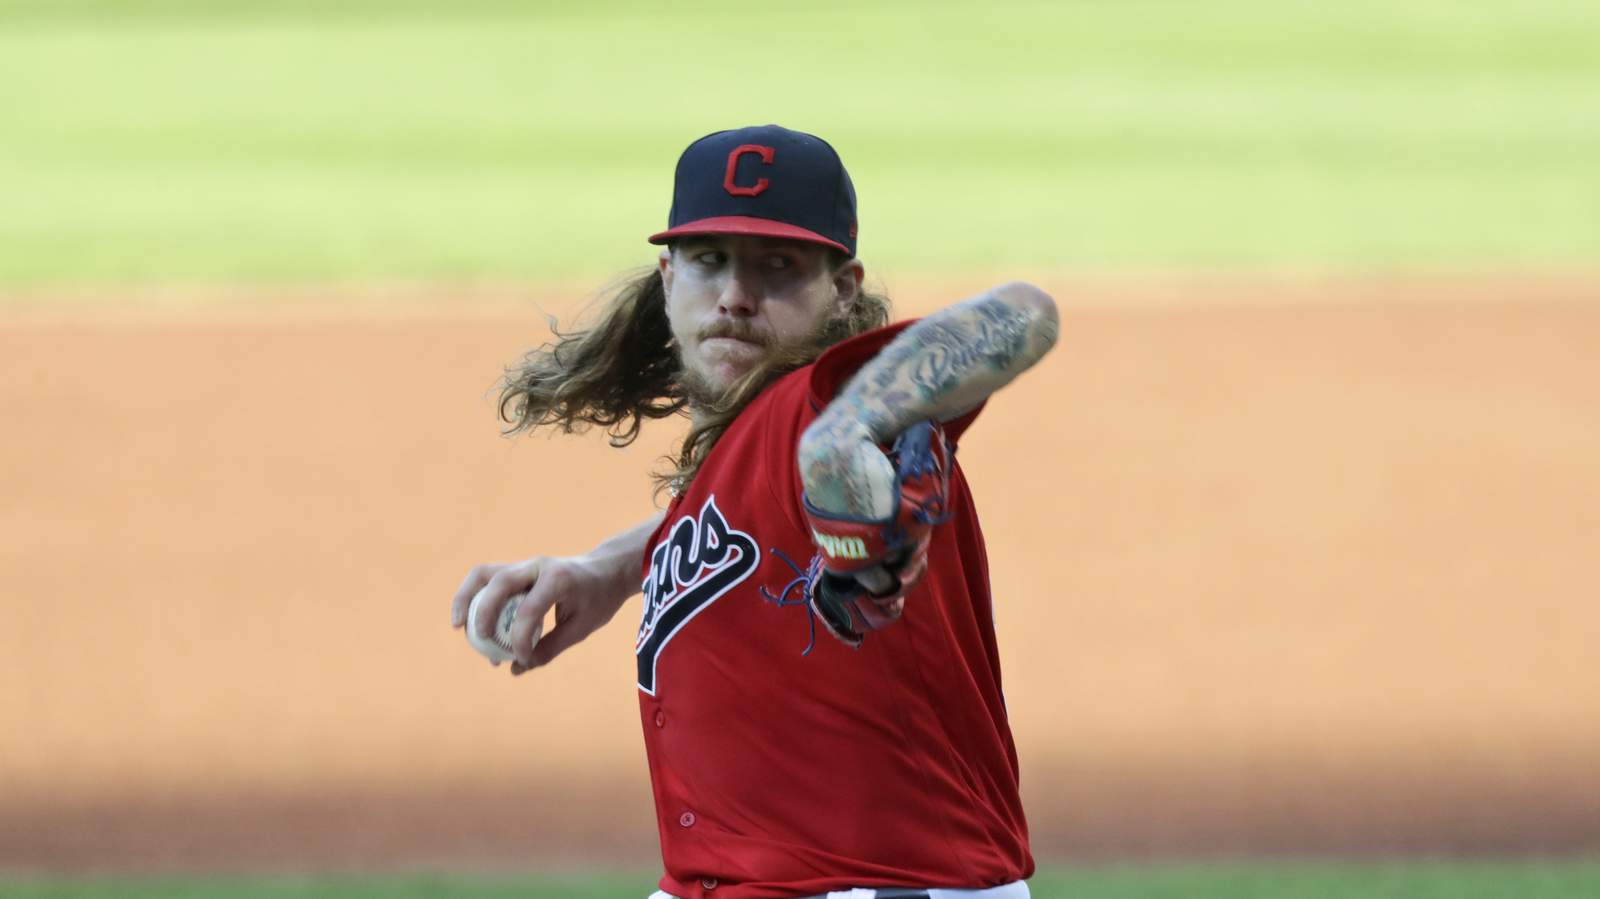 LEADING OFF: Indians restrict Clevinger, Plesac; Stanton out